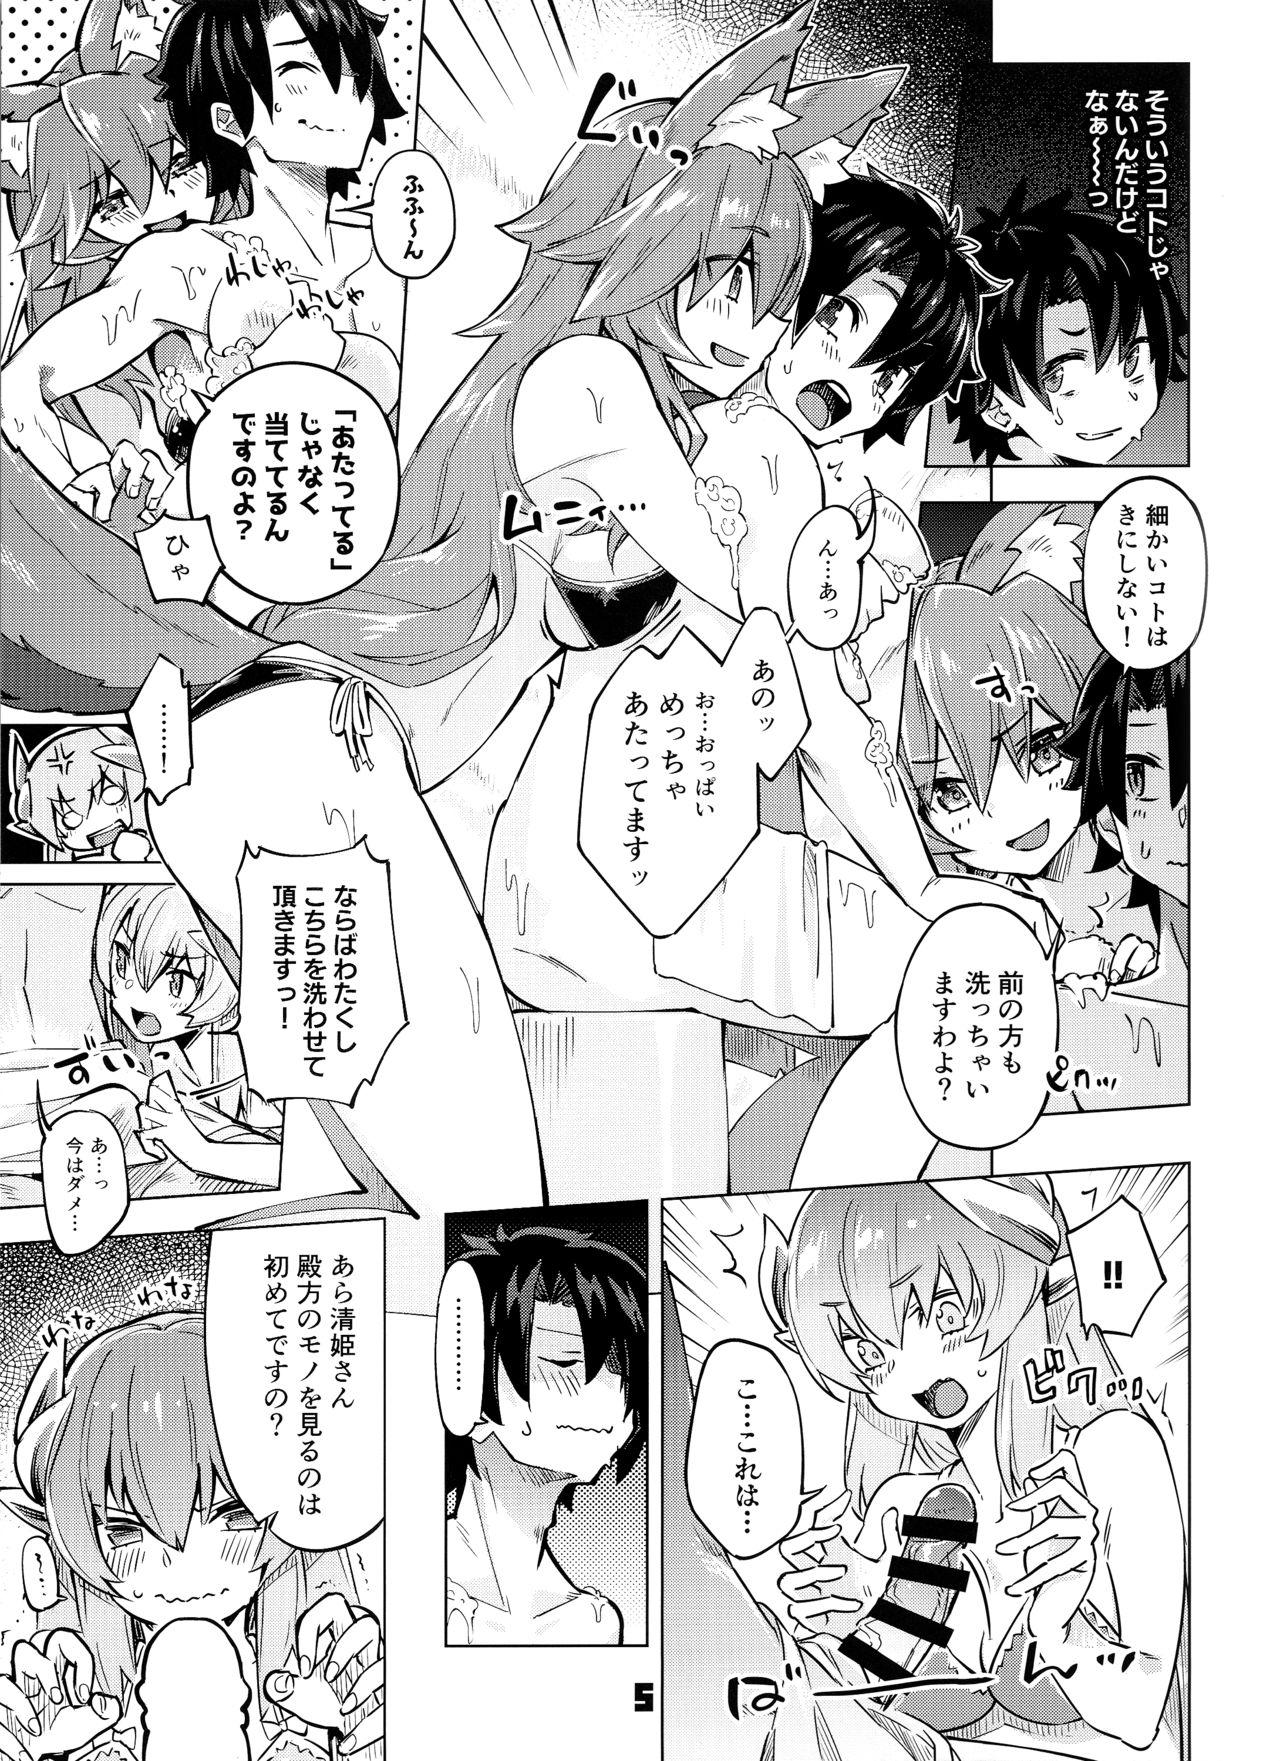 Punished Sex Shinai to Derarenai My Room 2 - My room can not go out - Fate grand order Gay Straight Boys - Page 4